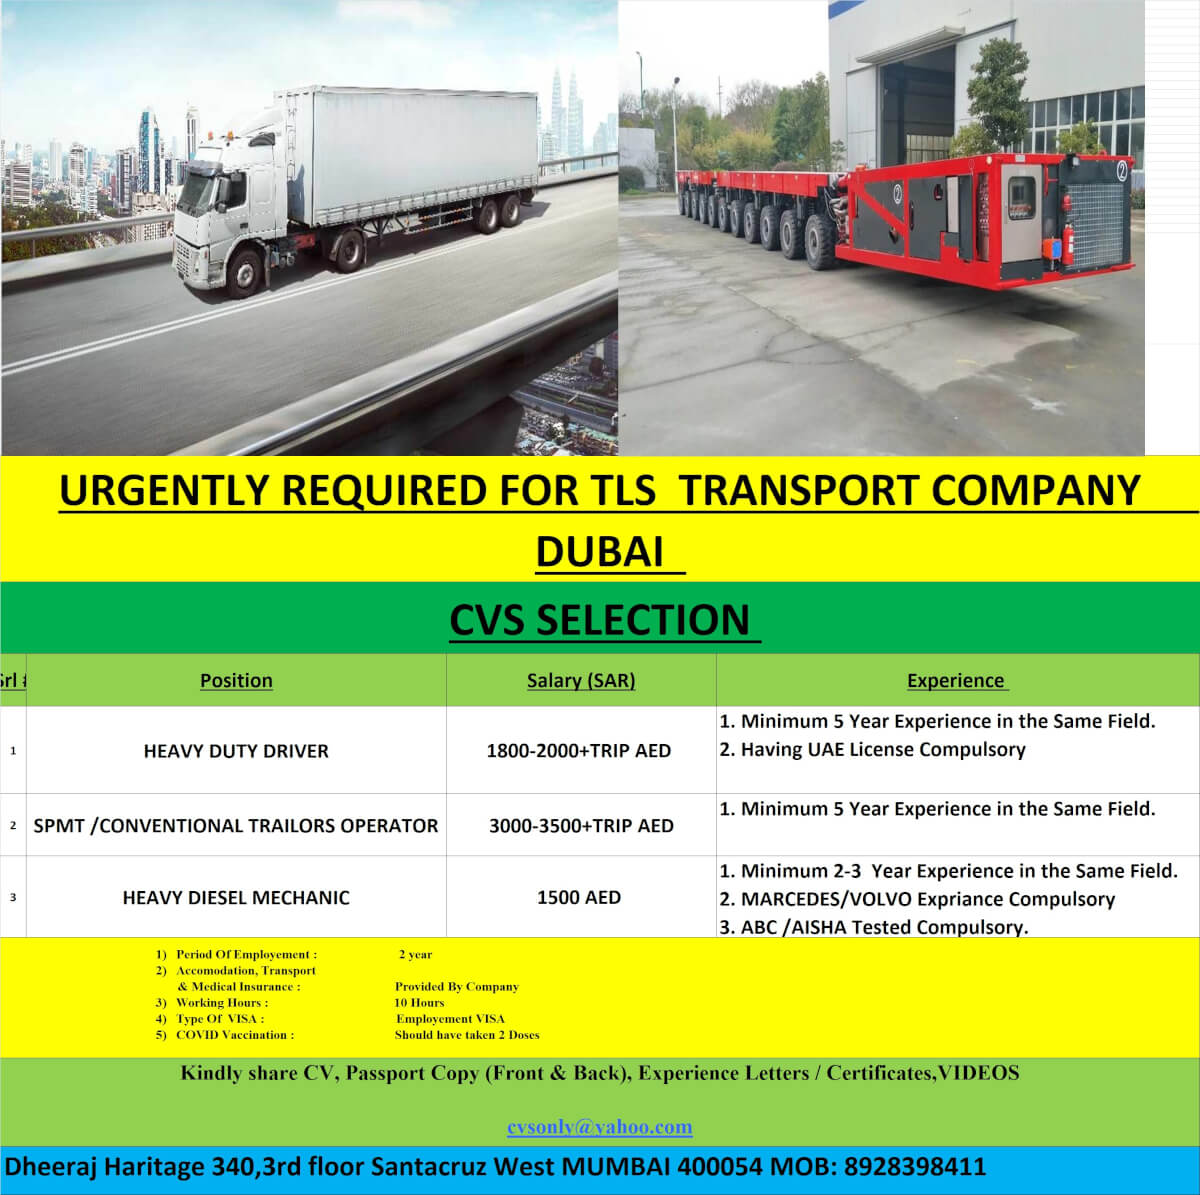 URGENTLY REQUIRED FOR TLS TRANSPORT COMPANY DUBAI